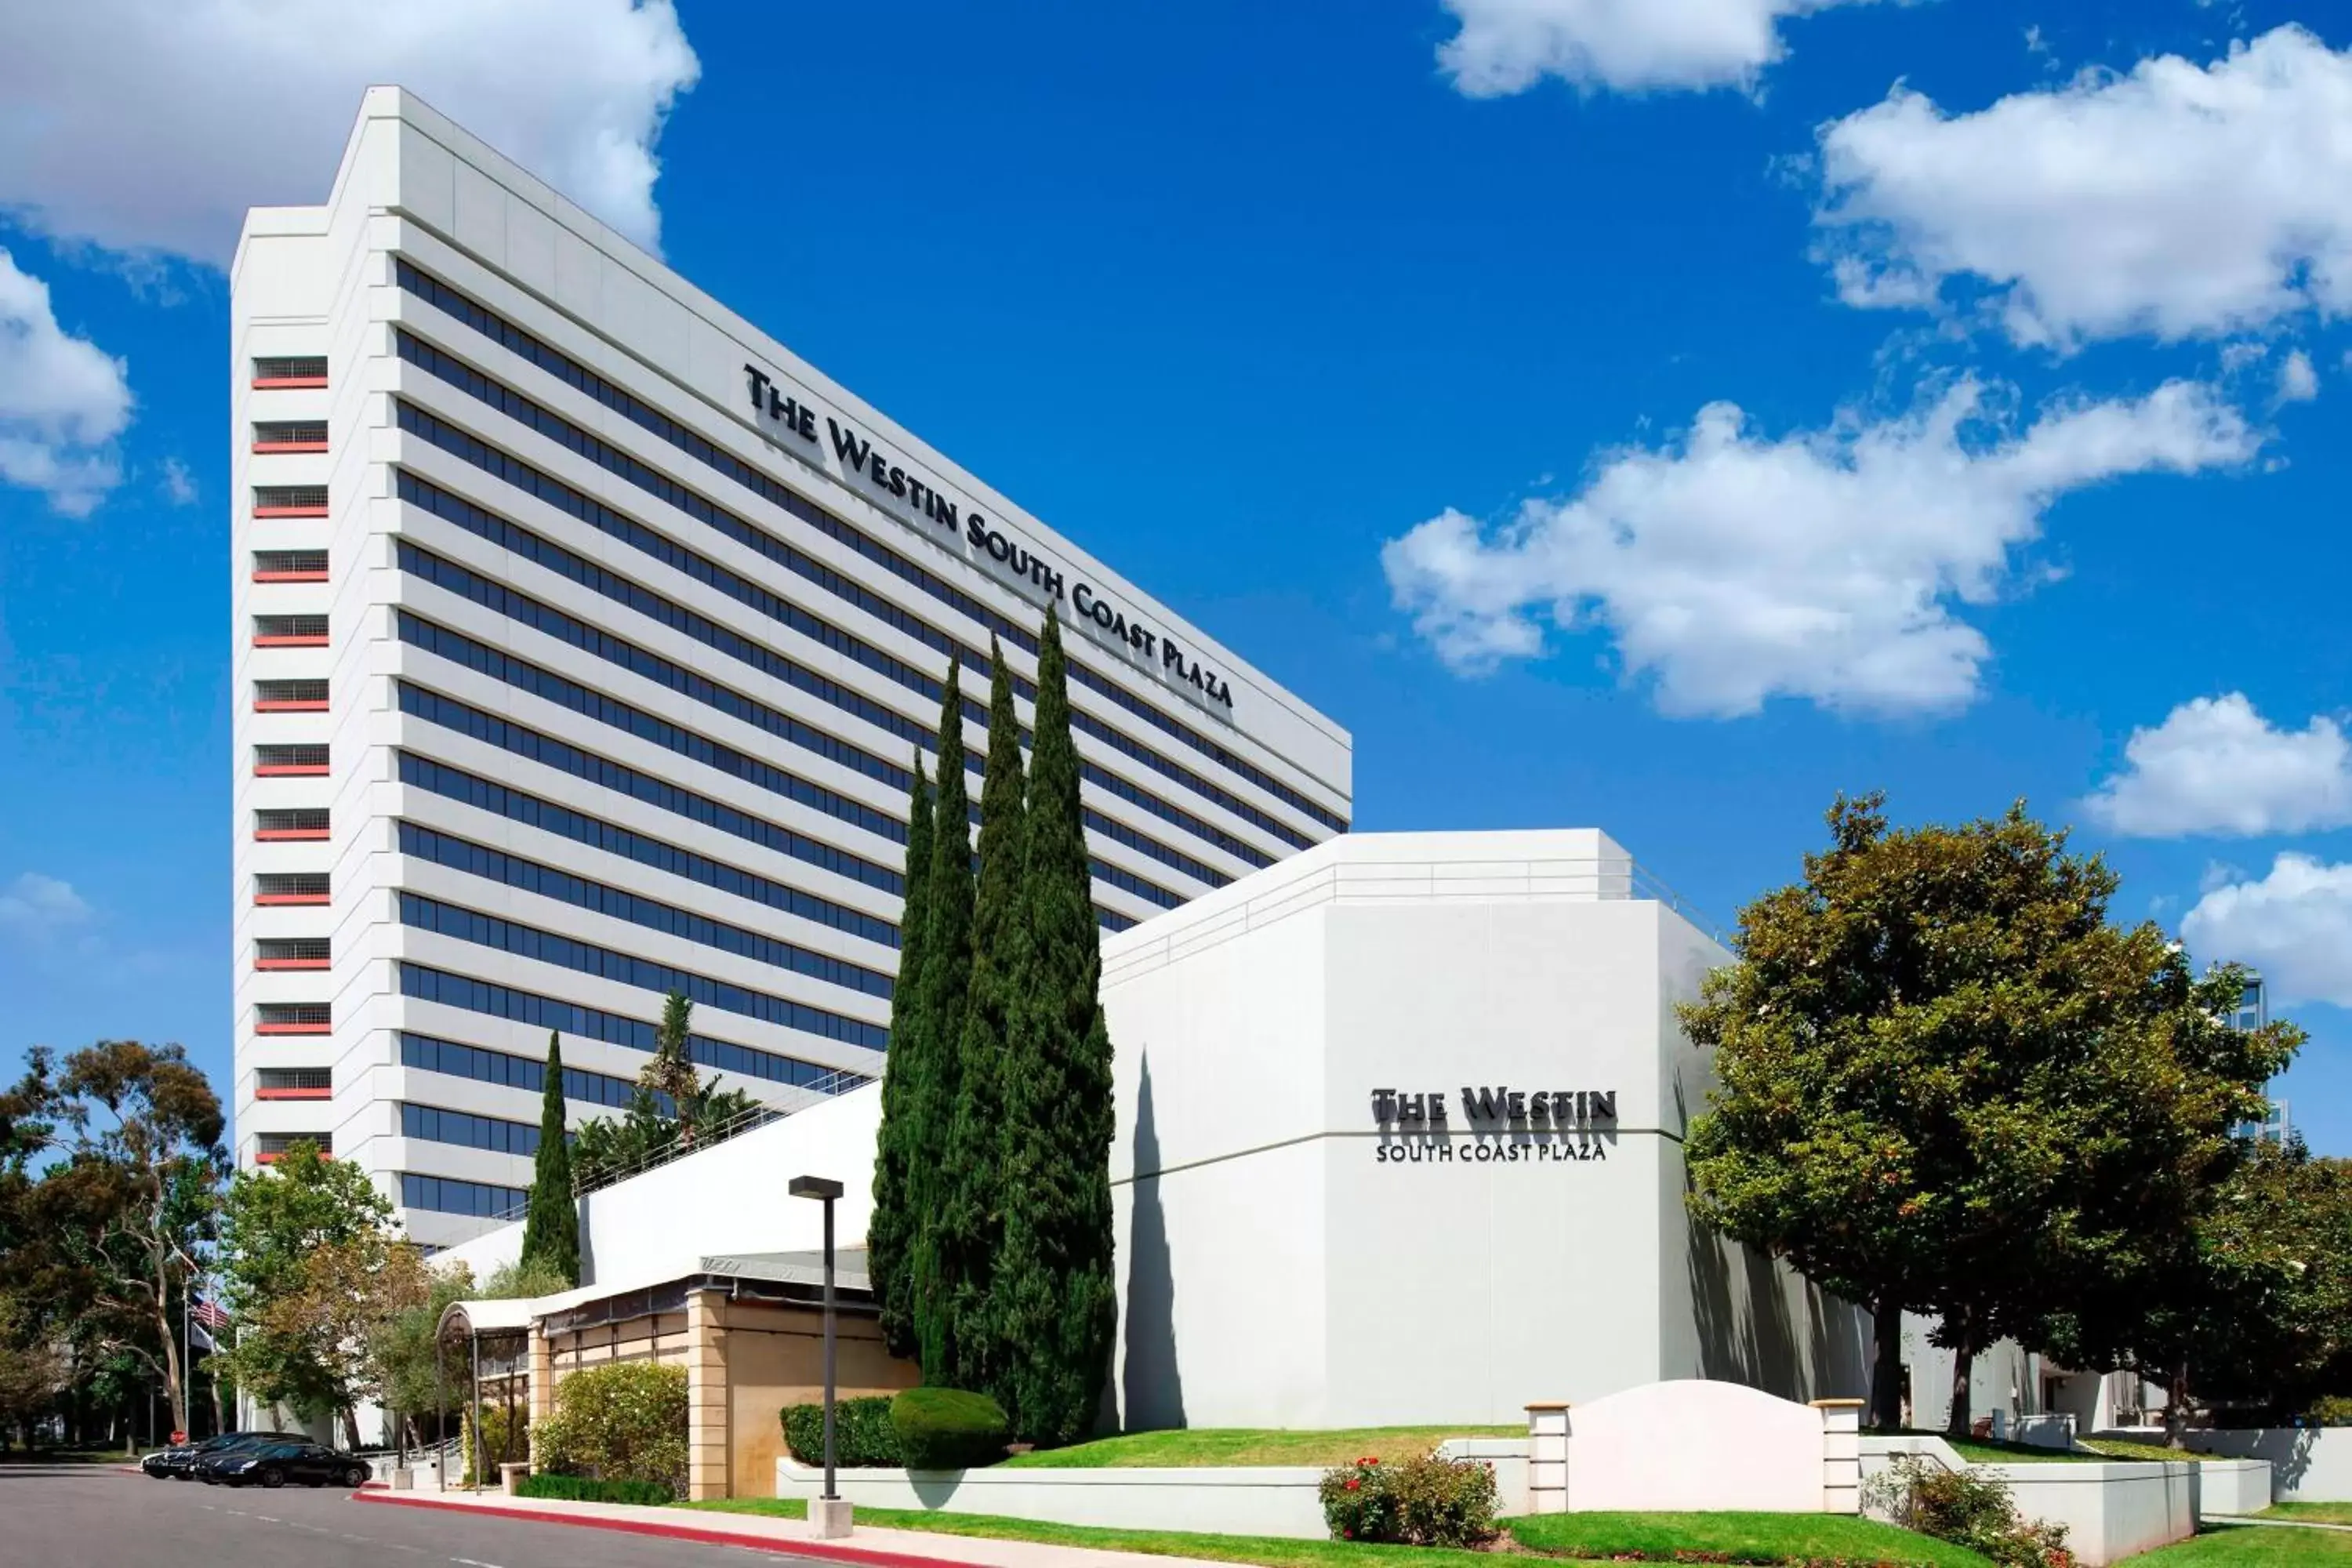 Property Building in The Westin South Coast Plaza, Costa Mesa